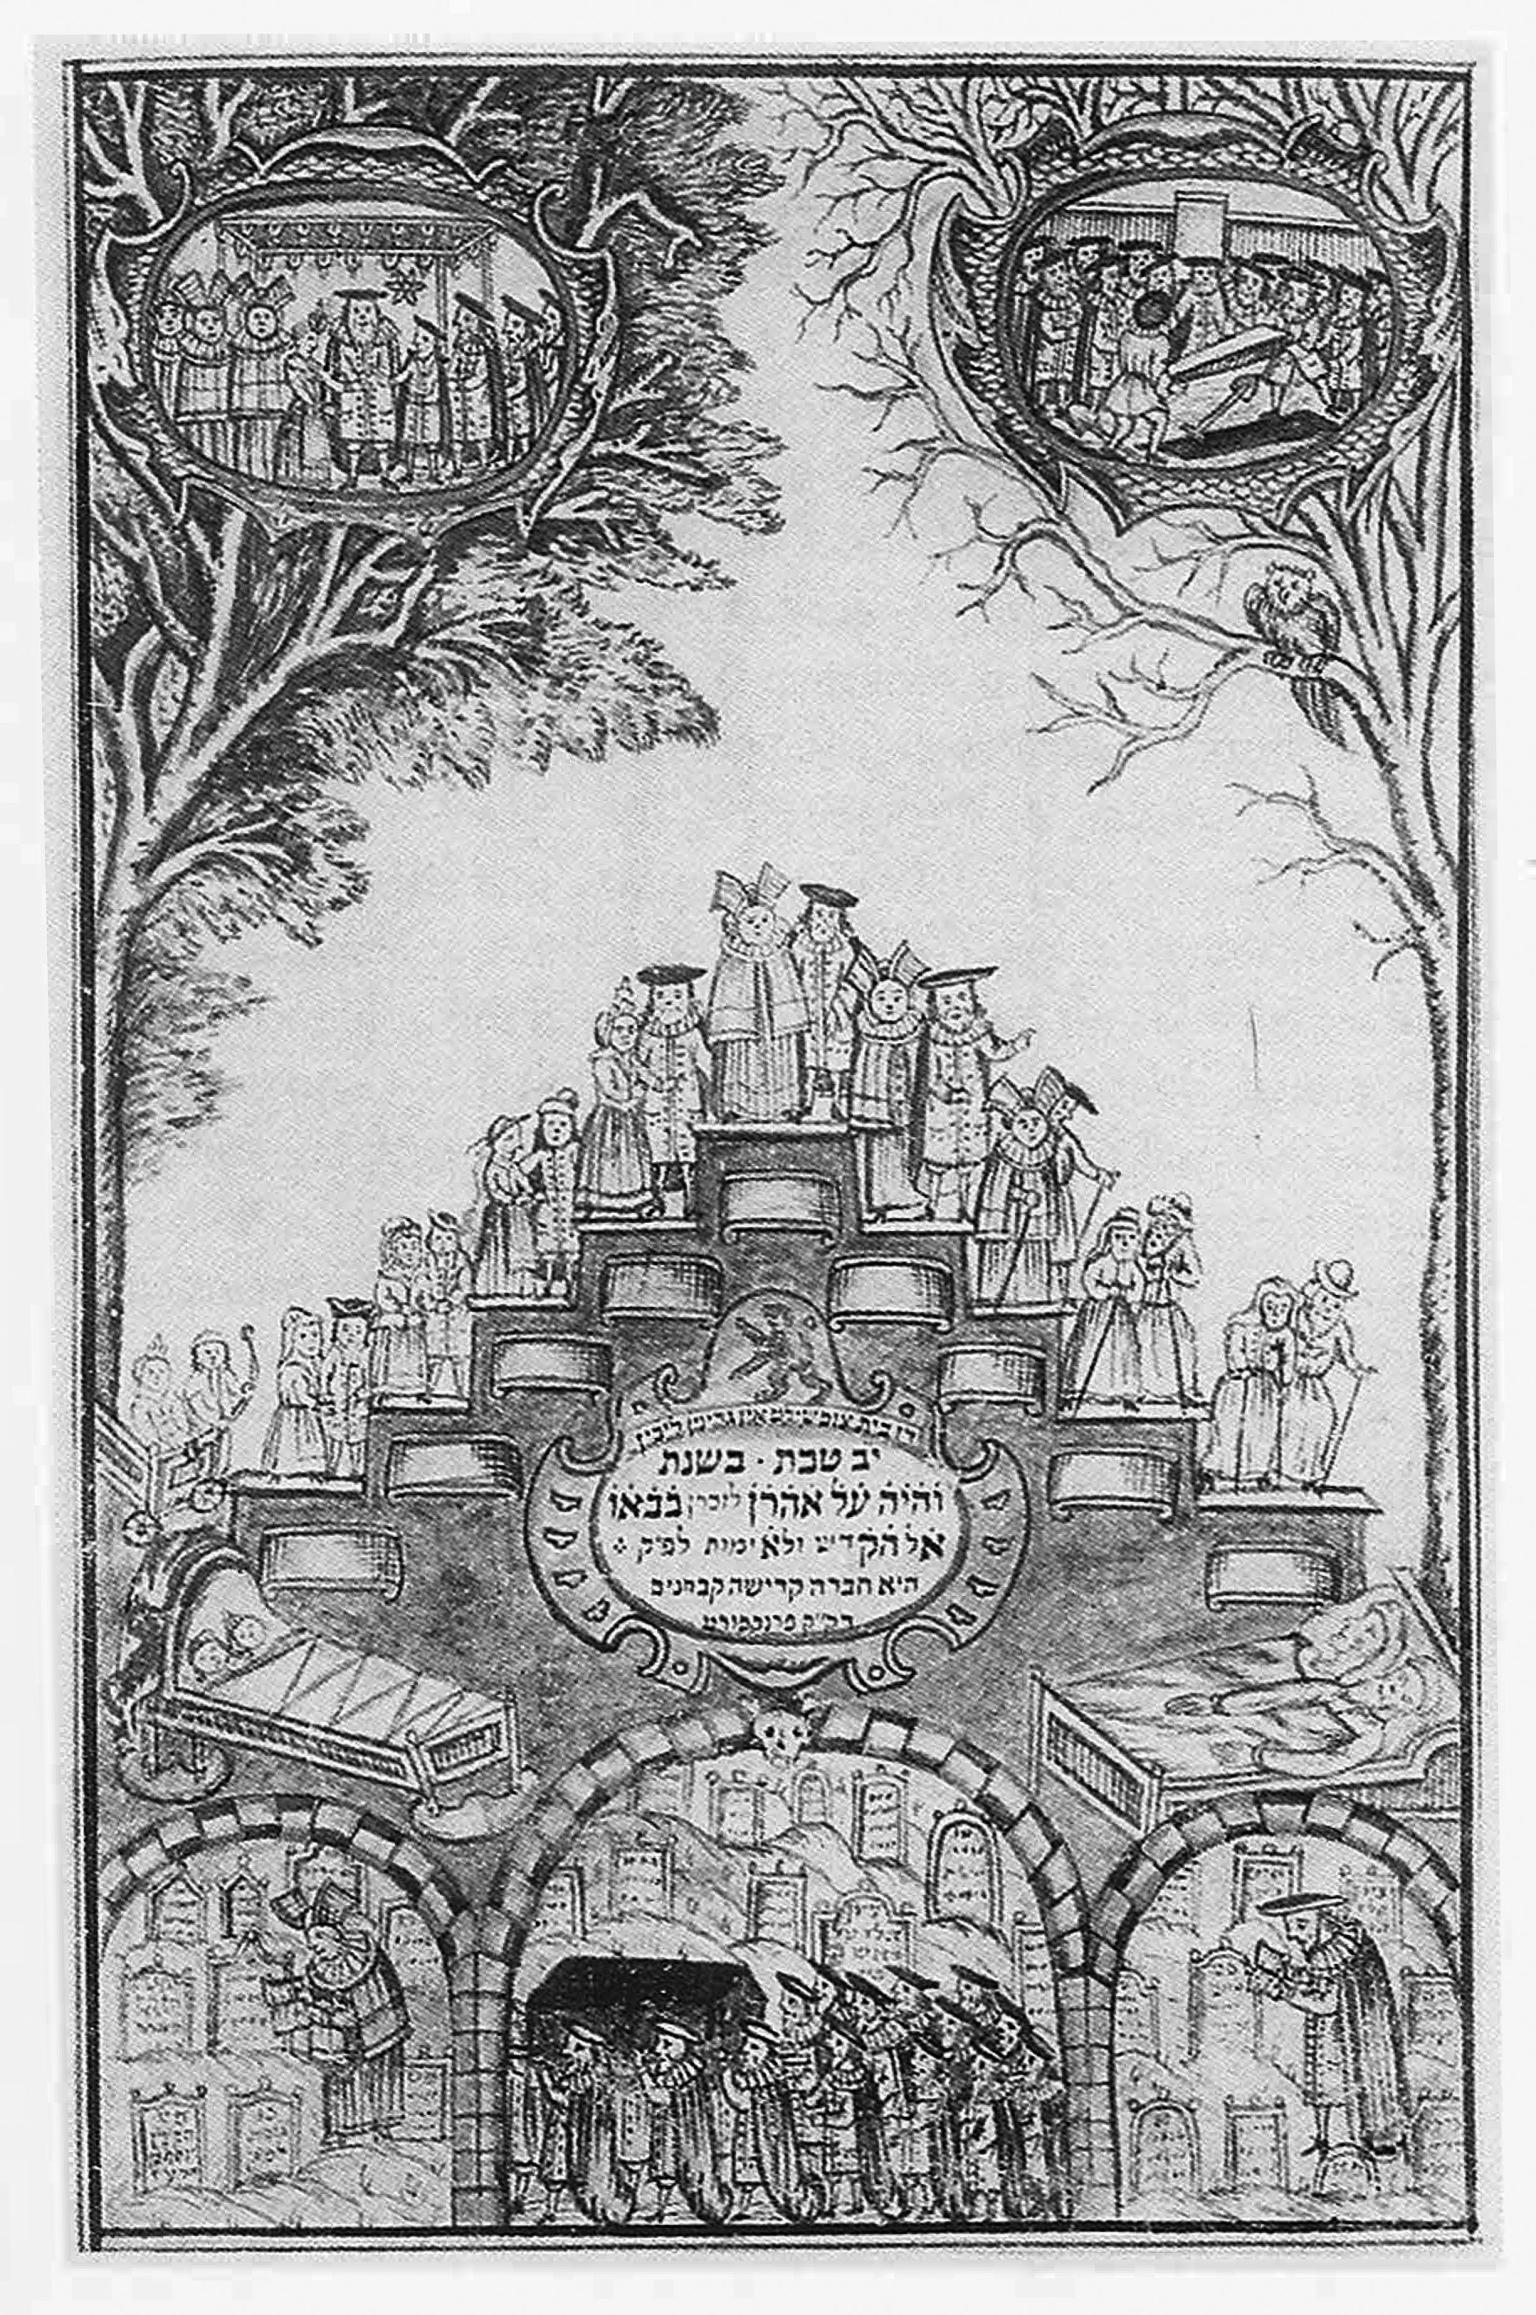 Print of multi-leveled platform with couples standing on each tier, with Hebrew text and many gravestones and figures beneath the platform, and two trees above the platform with scenes of many figures inside. 